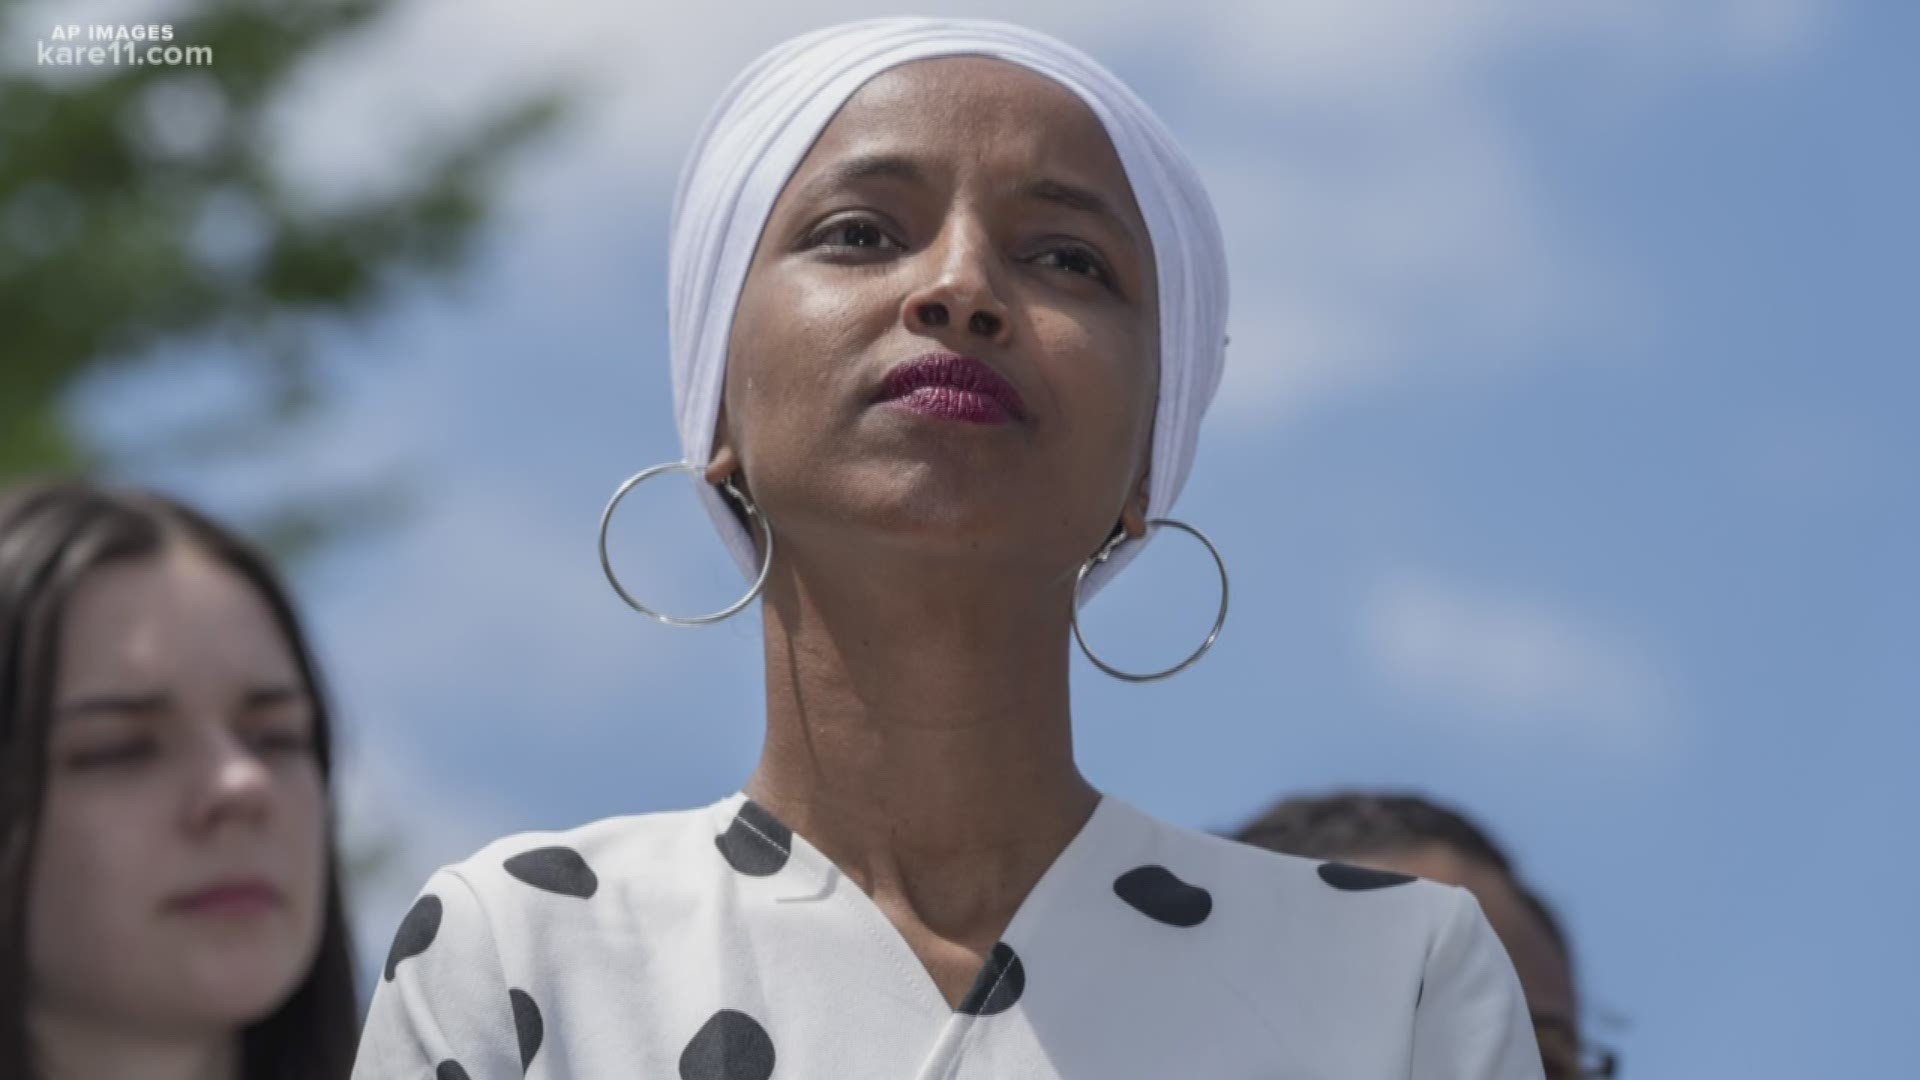 Yesterday, a conservative group filed a complaint with the Federal Election Commission accusing Rep. Omar of using campaign money to pay for personal travel to visit a married man.